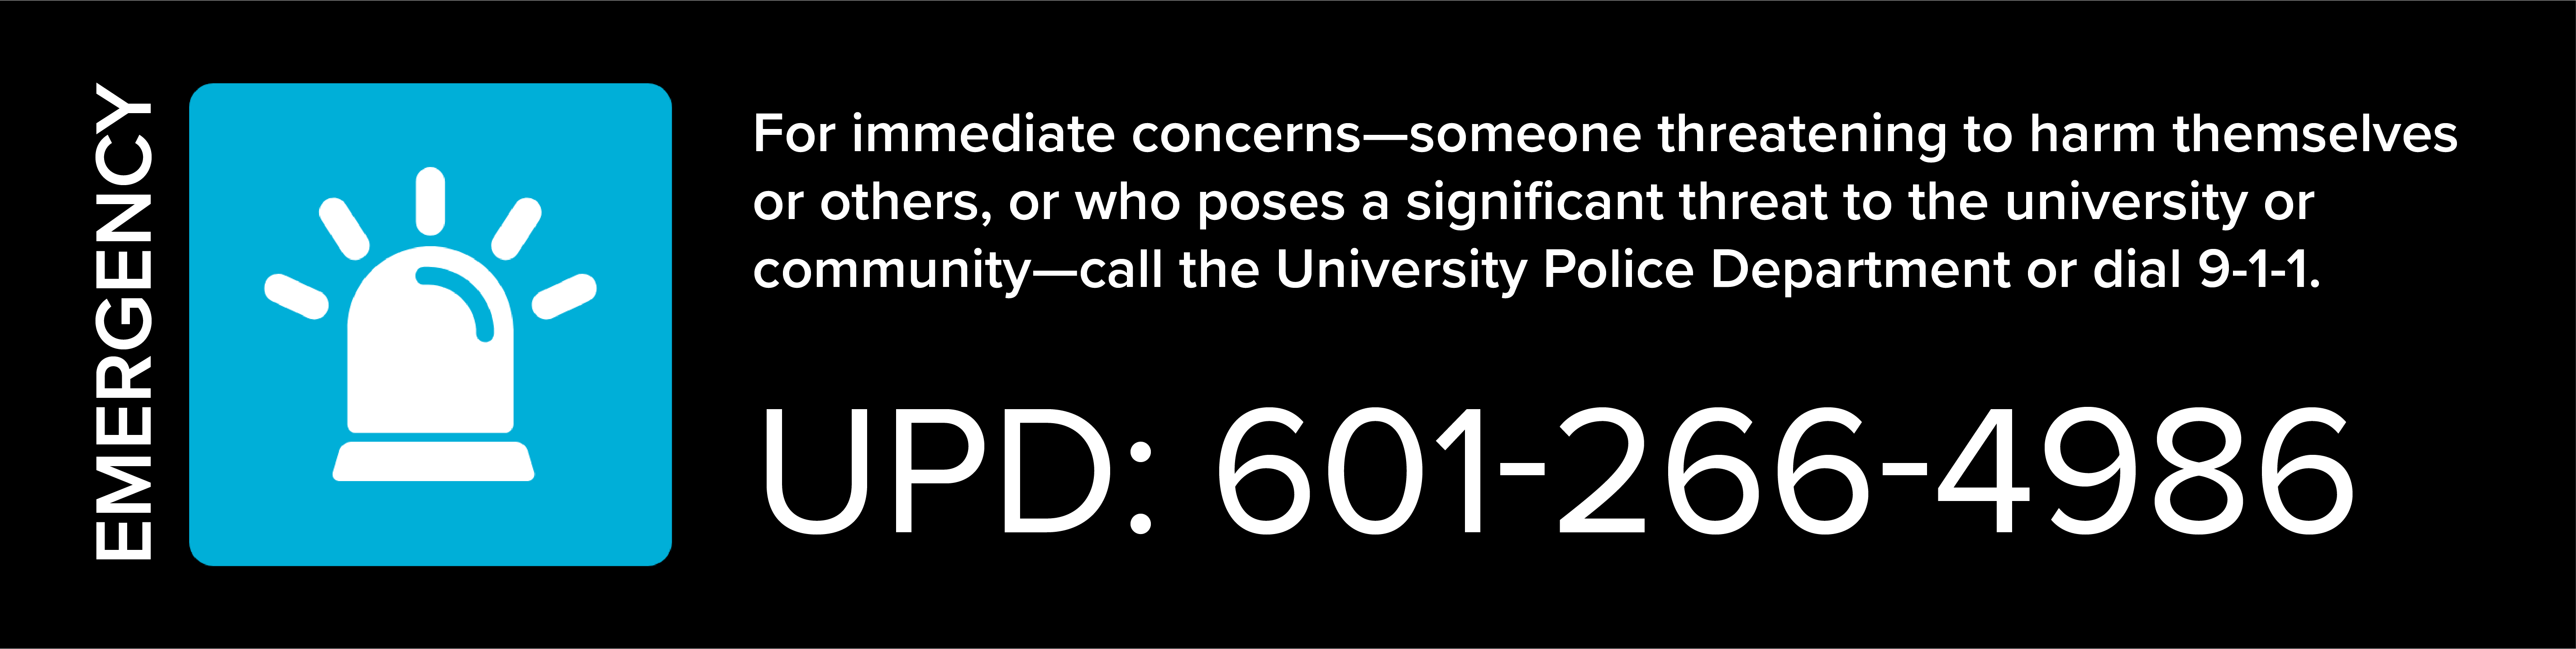 In case of emergency, dial University Police at 601-266-4986 or call 9-1-1